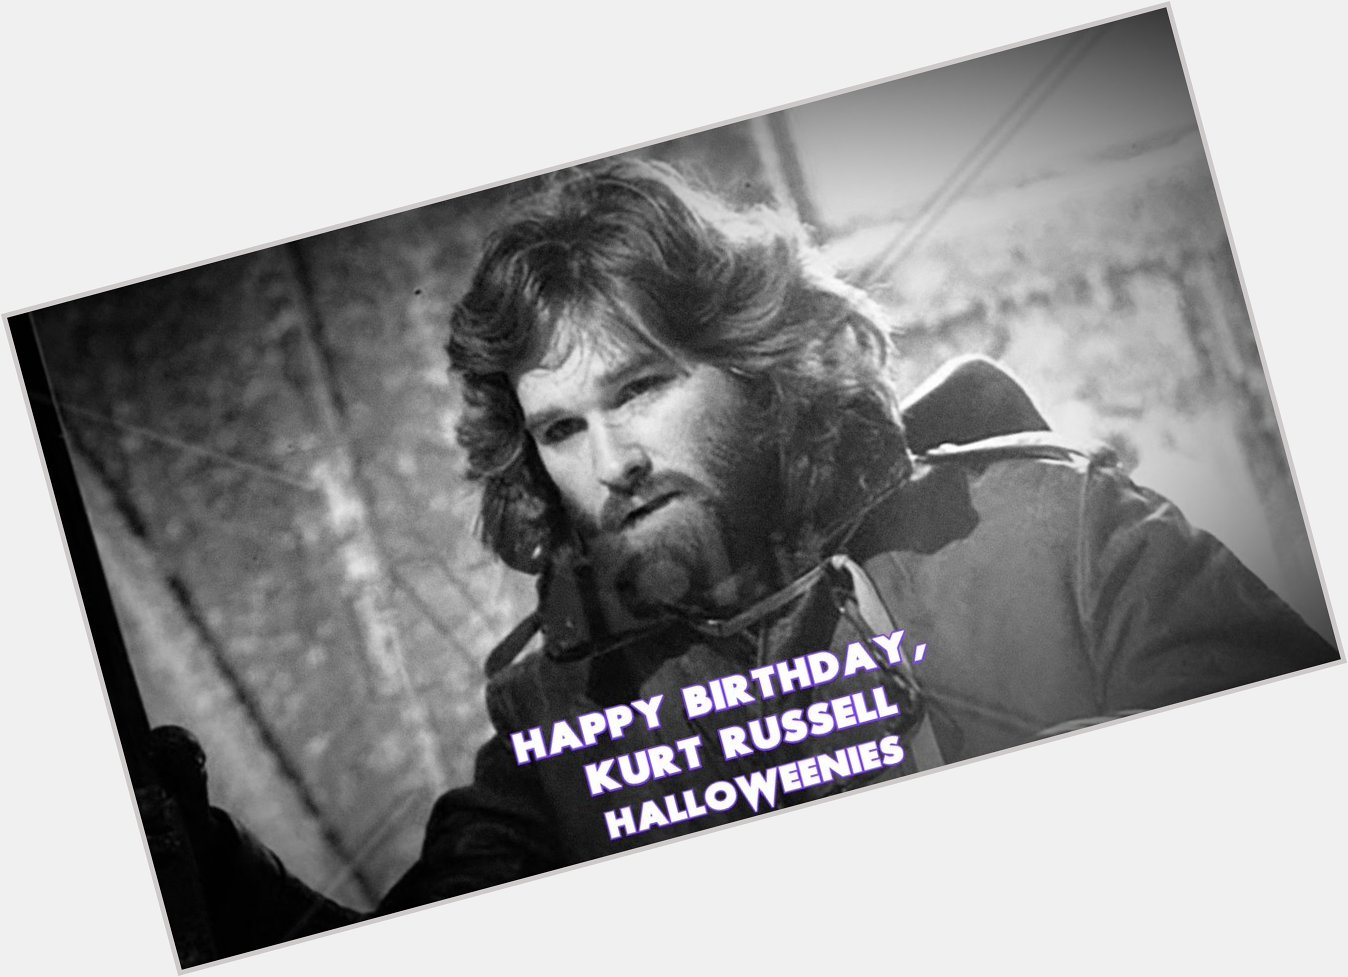 Pour some J&B and wish Kurt Russell a big ol\ Happy Birthday! What\s your favorite role of his? 